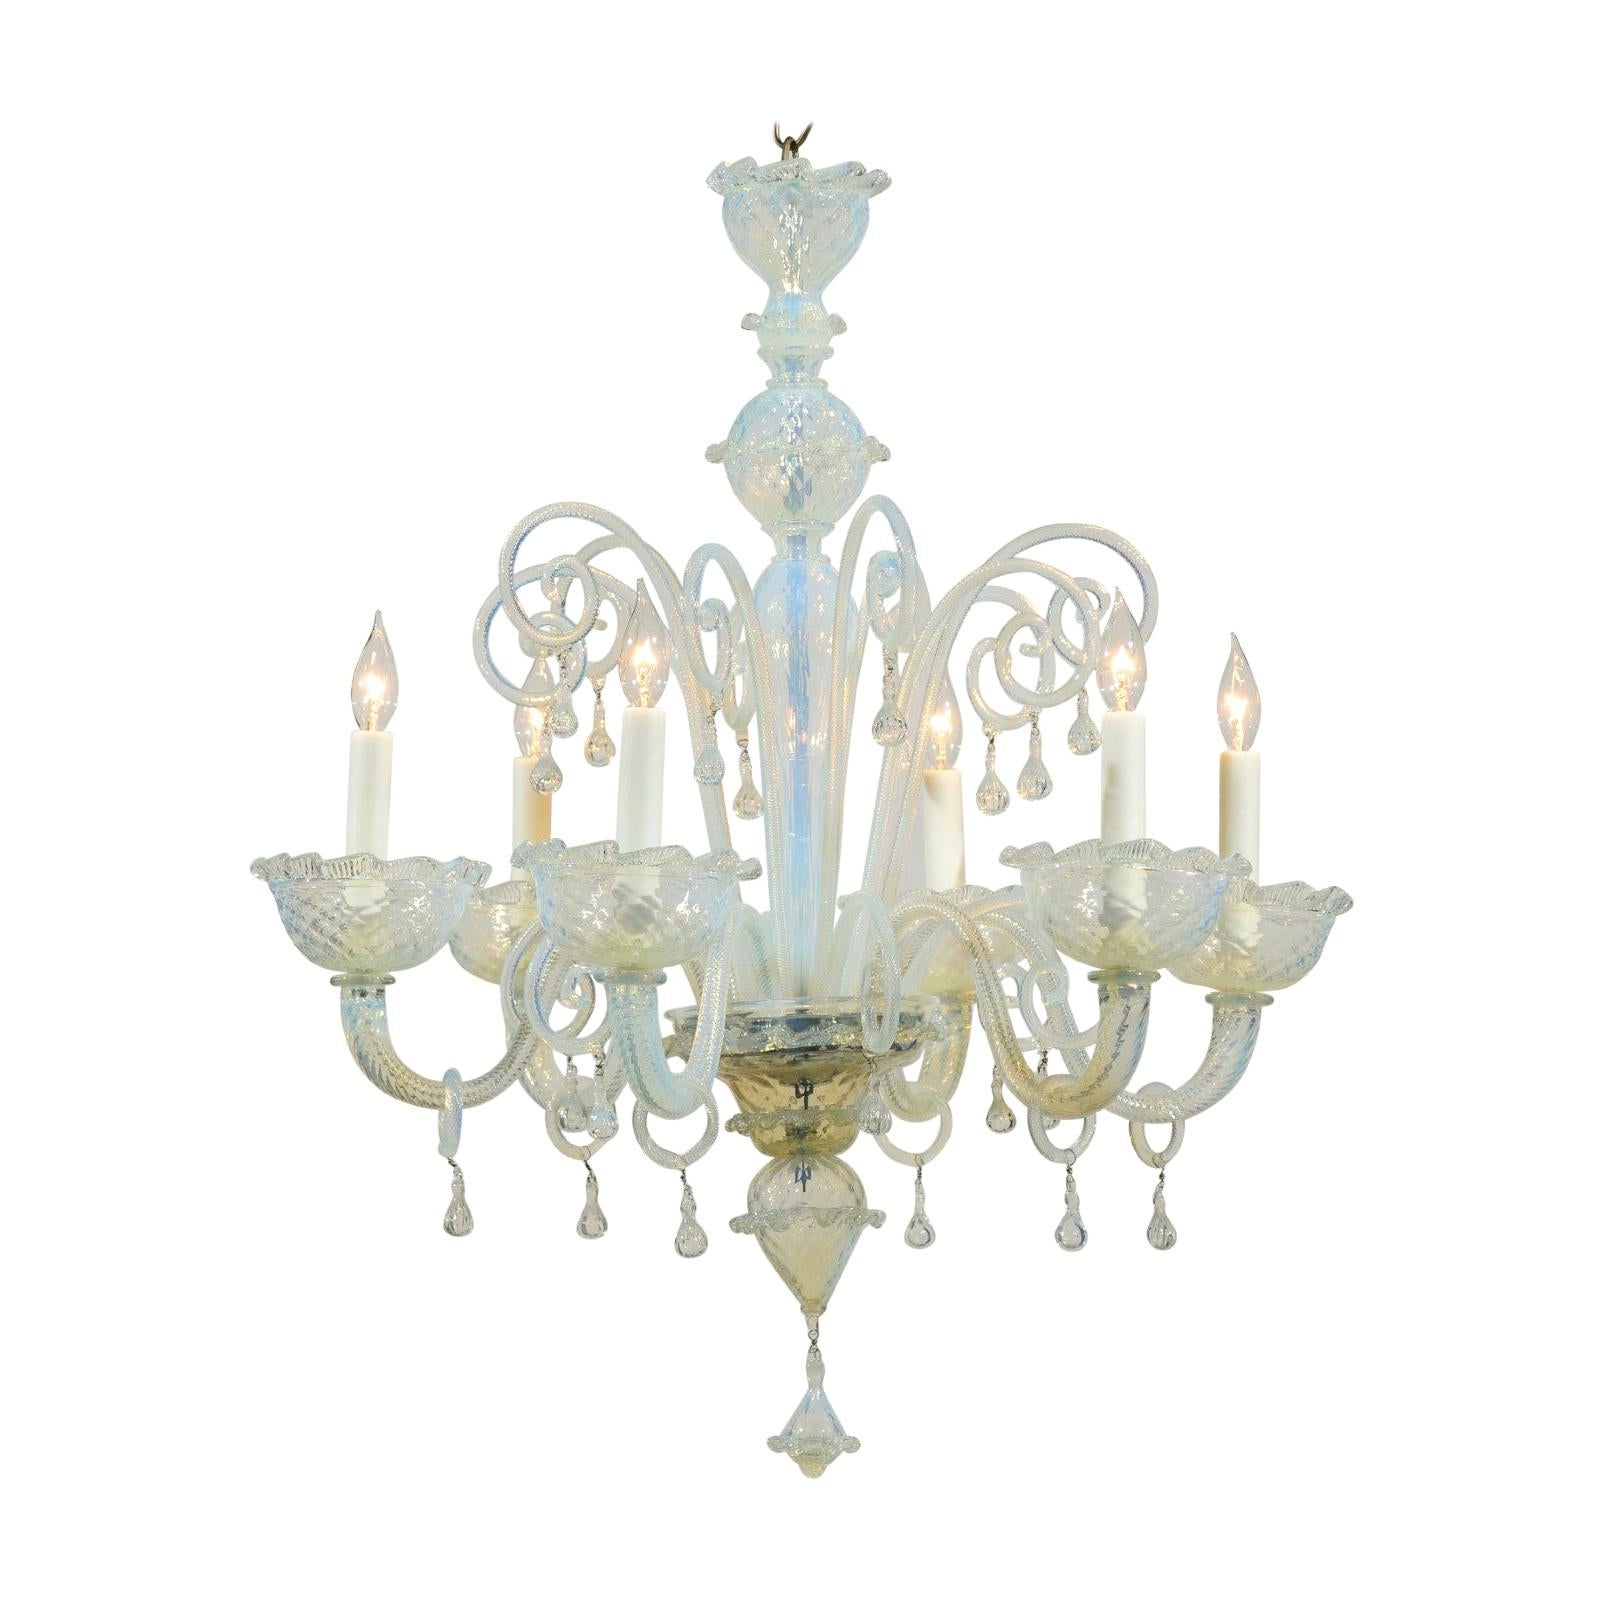 Opalene Murano Glass Midcentury Six-Light Chandelier with Scrolled Arms